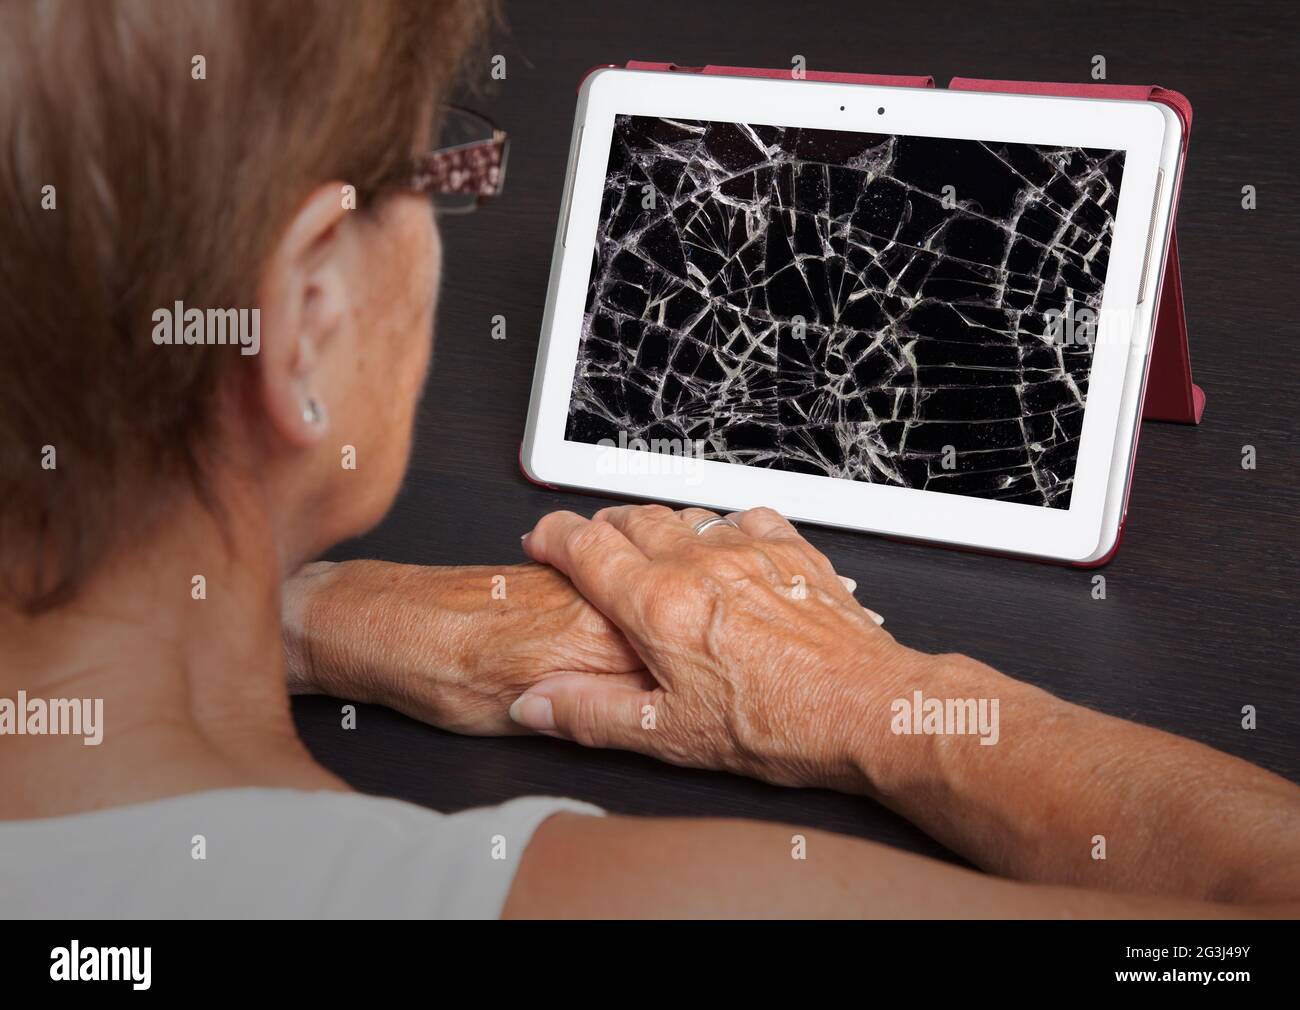 Senior lady with tablet, cracked screen Stock Photo